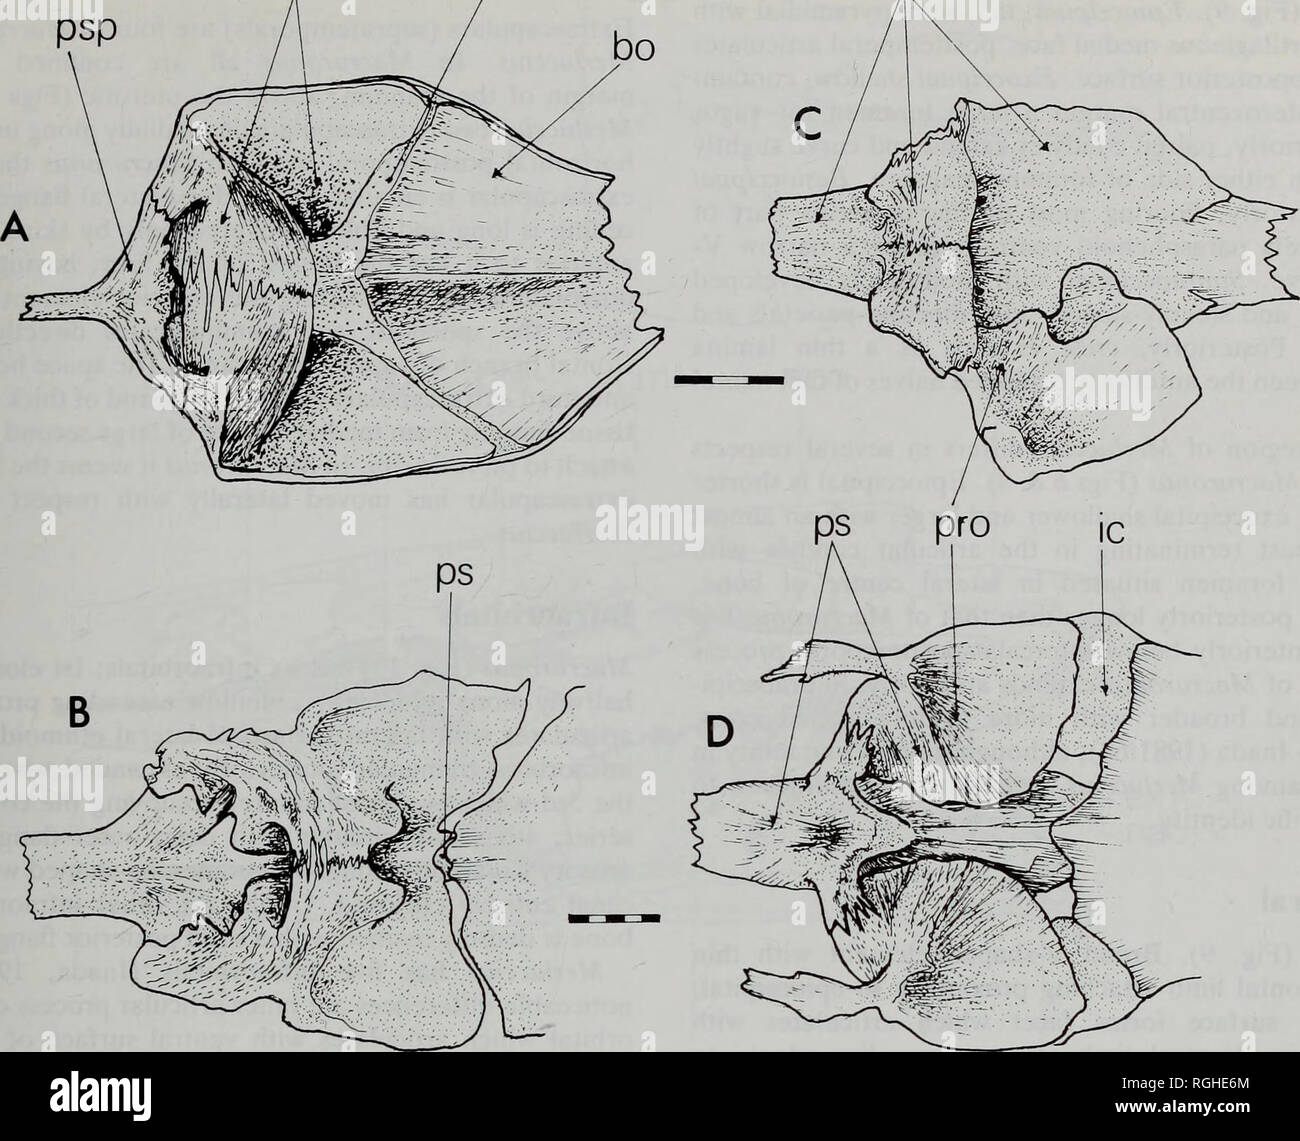 . Bulletin of the British Museum (Natural History) Zoology. ANATOMY, PHYLOGENY AND TAXONOMY OF THE GADOID FISH GENUS MACRURONUS pro ic p: p$p r / b0 83. Fig. 6 Dorsal views of the cranial floor of A, Macruronus magellanicus (BMNH 1936.8.26: 352-7); B, Merluccius merluccius; C, Mora moro; D, Merlangius merlangus. (B-C from Ford collection of unregistered skeletal material). Pterotic shallow but broad; posterolateral^ meets inter- calar and together they form a broad, slightly outwardly directed wing. Pterotic bears anterolaterally part of hyo- mandibular fossa; anterodorsally its roof bears a  Stock Photo